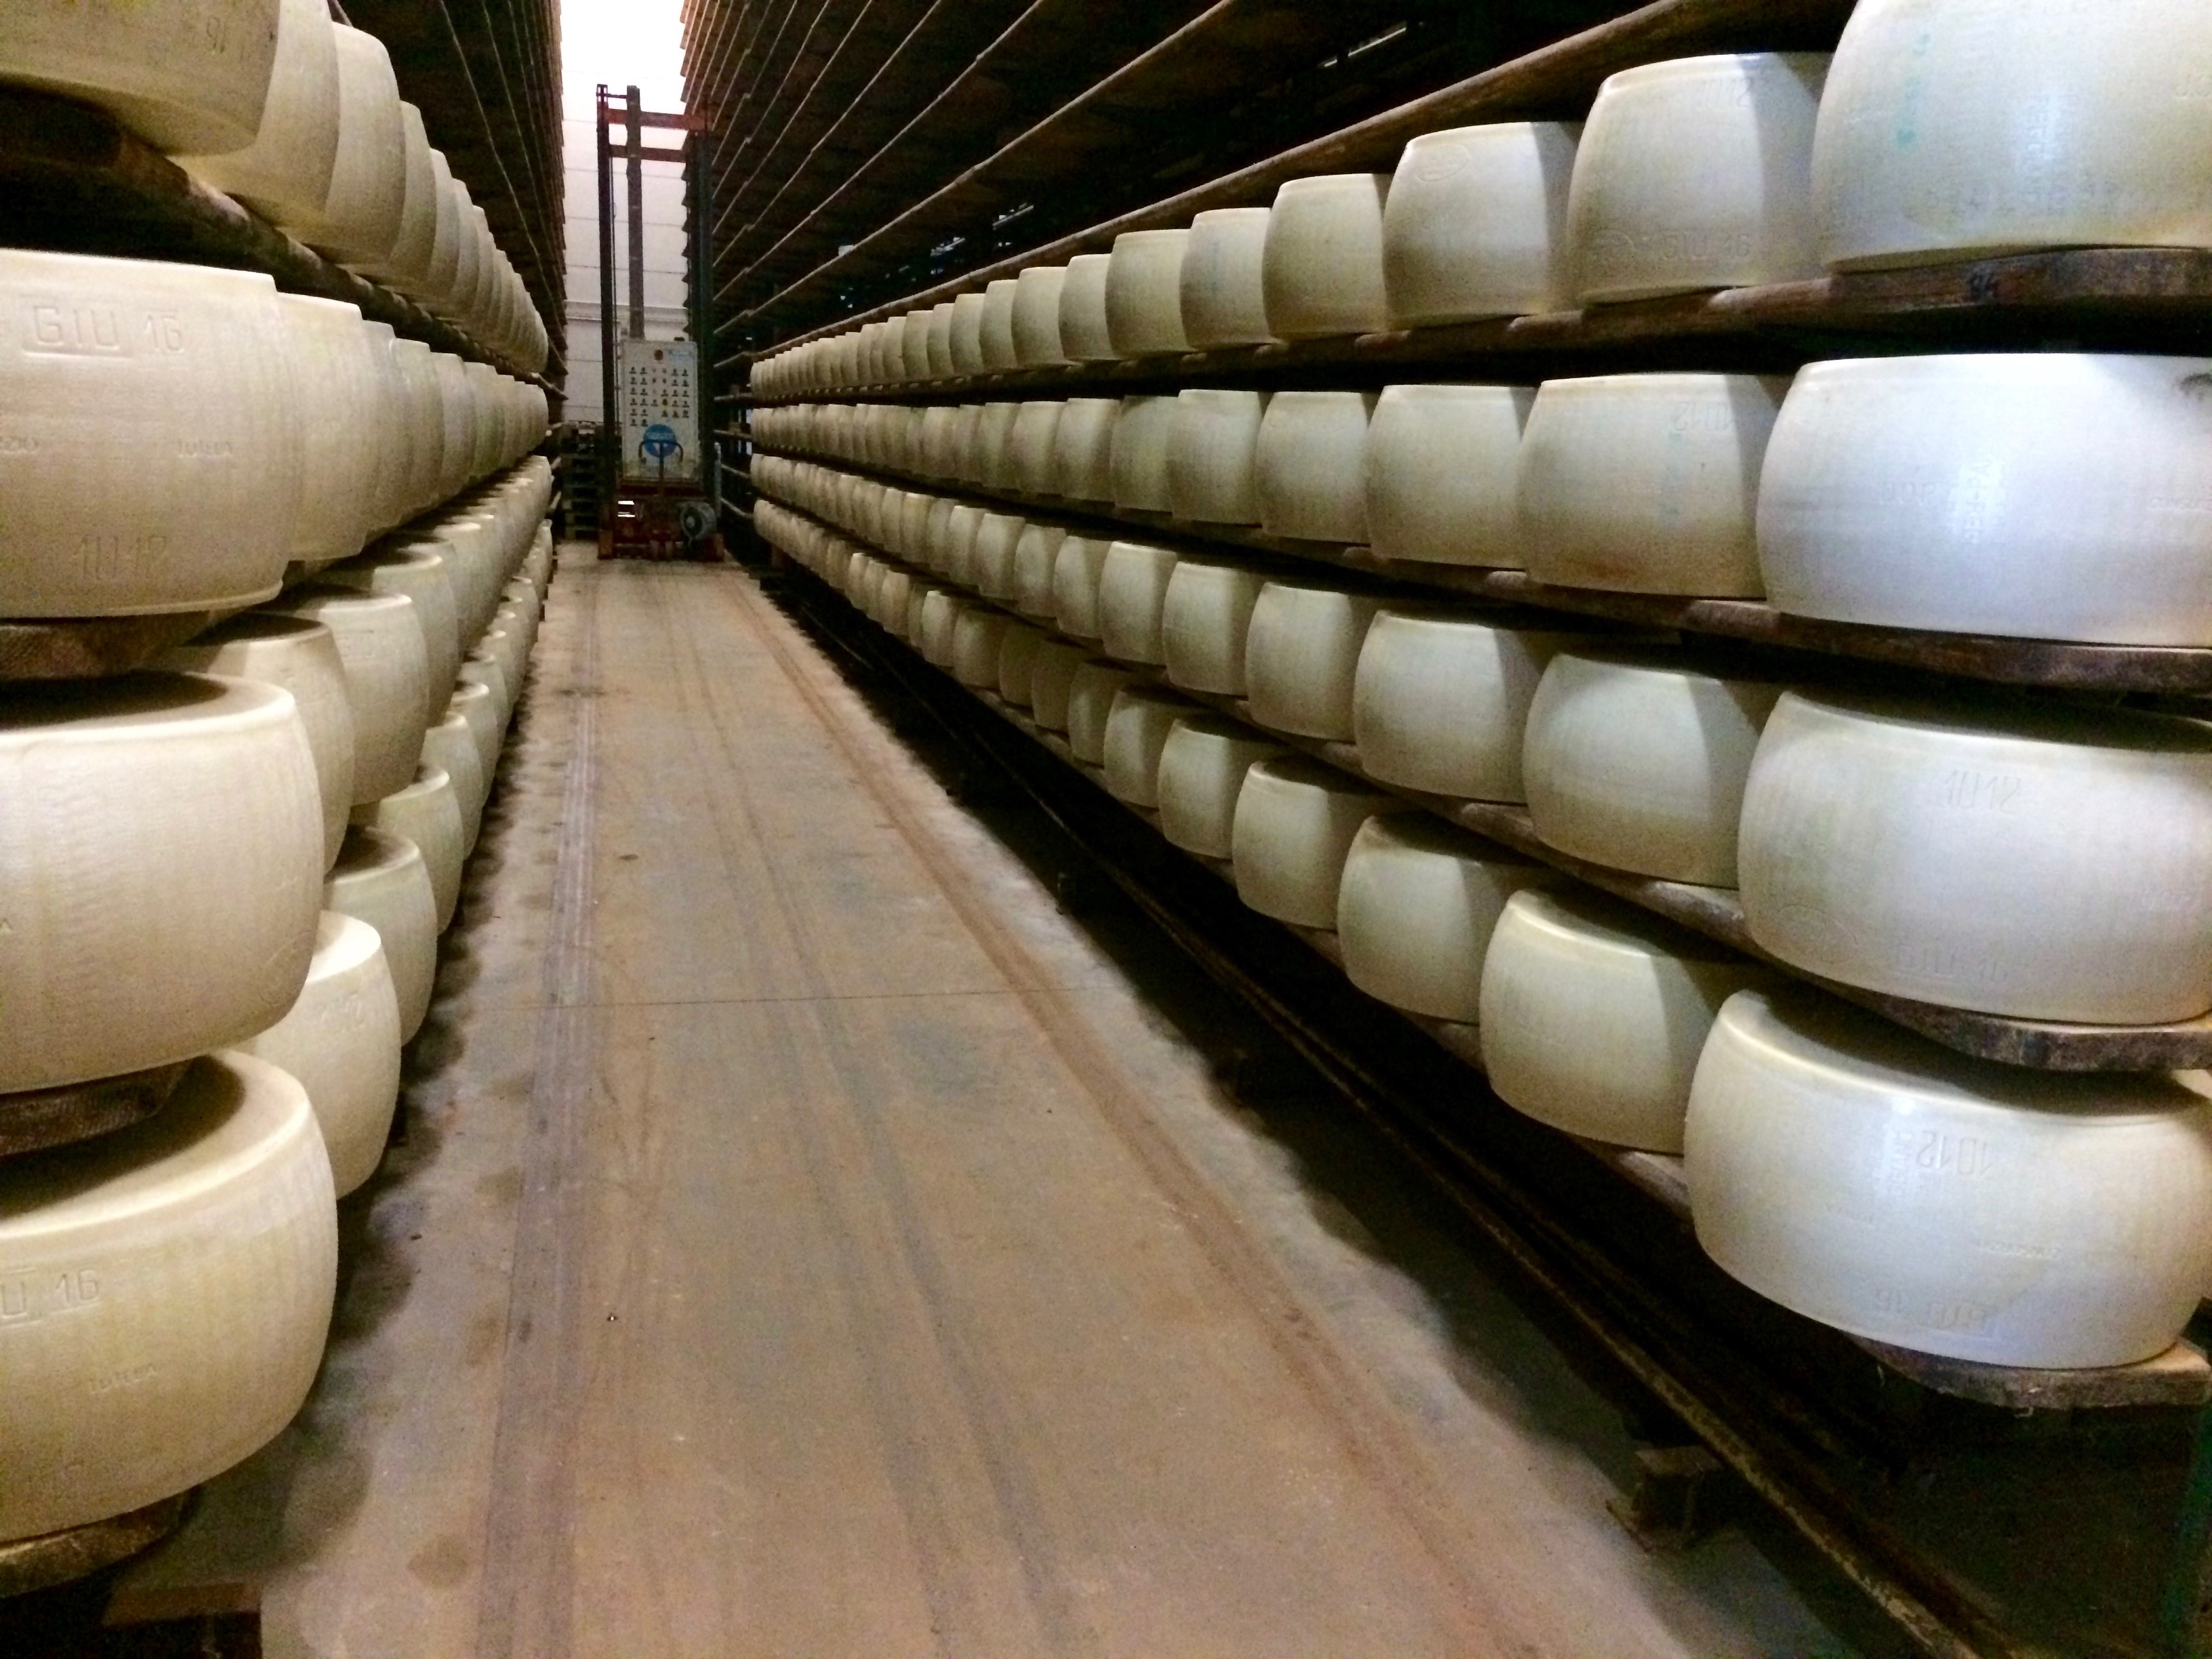 Countless wheels of cheese during our Parmigiano Reggiano Modena Food Tour